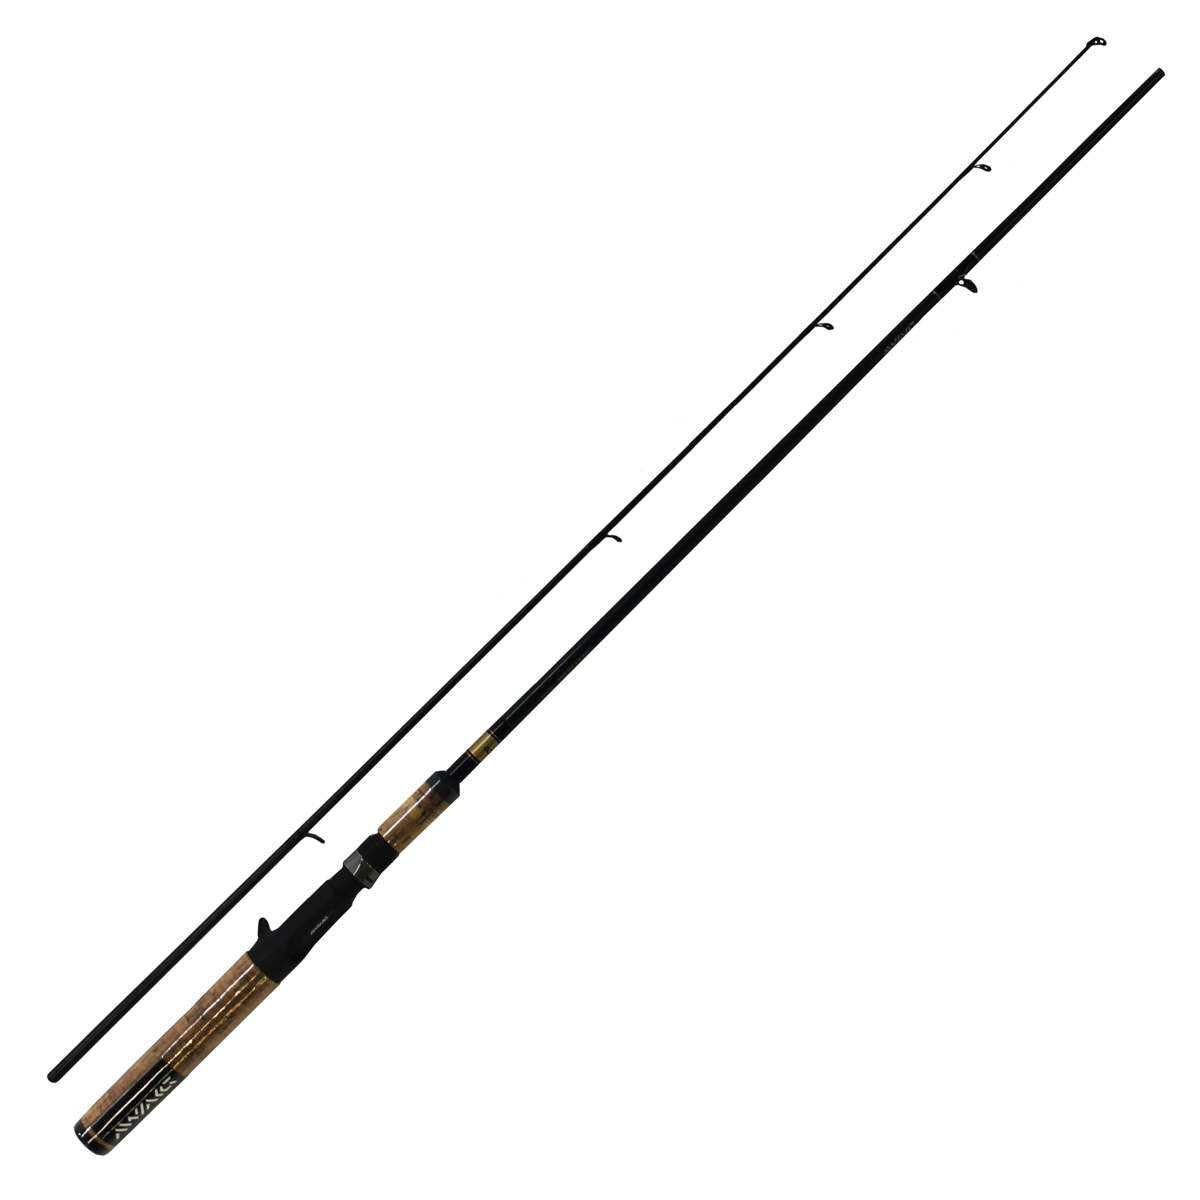 Photo of Daiwa Sweepfire-D Trigger Grip Casting Rod for sale at United Tackle Shops.